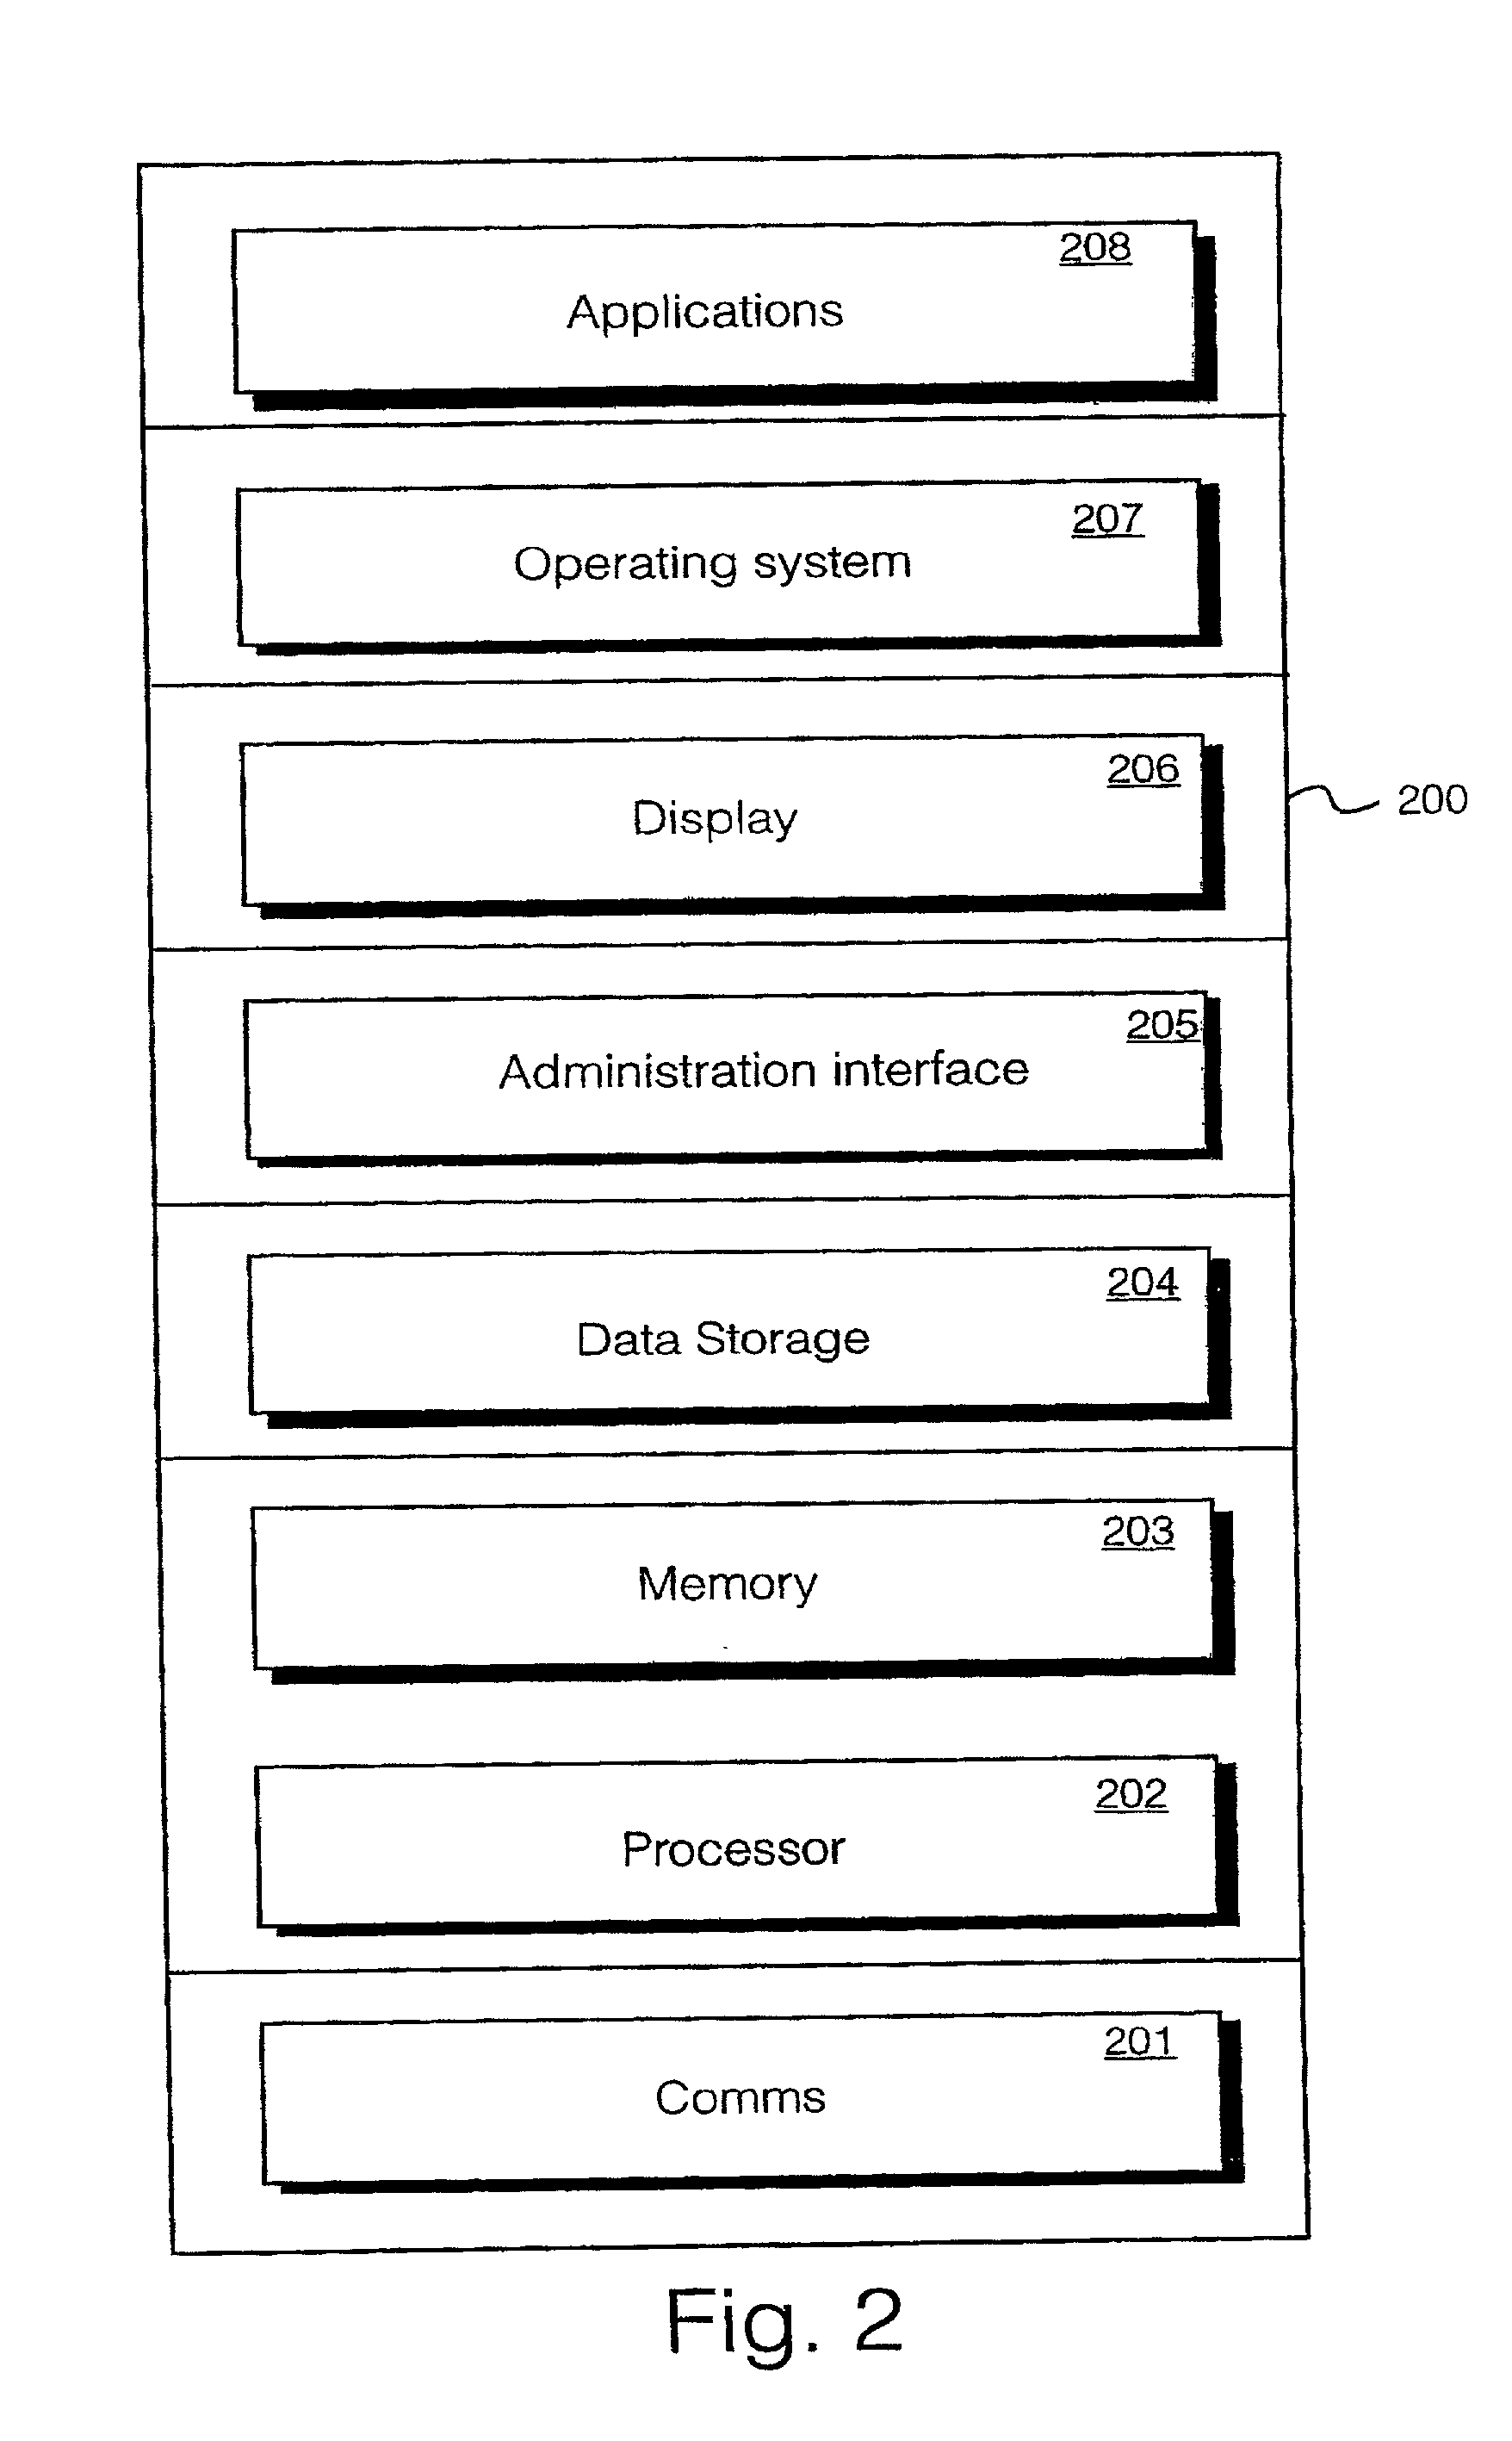 Performing operating system recovery from external back-up media in a headless computer entity